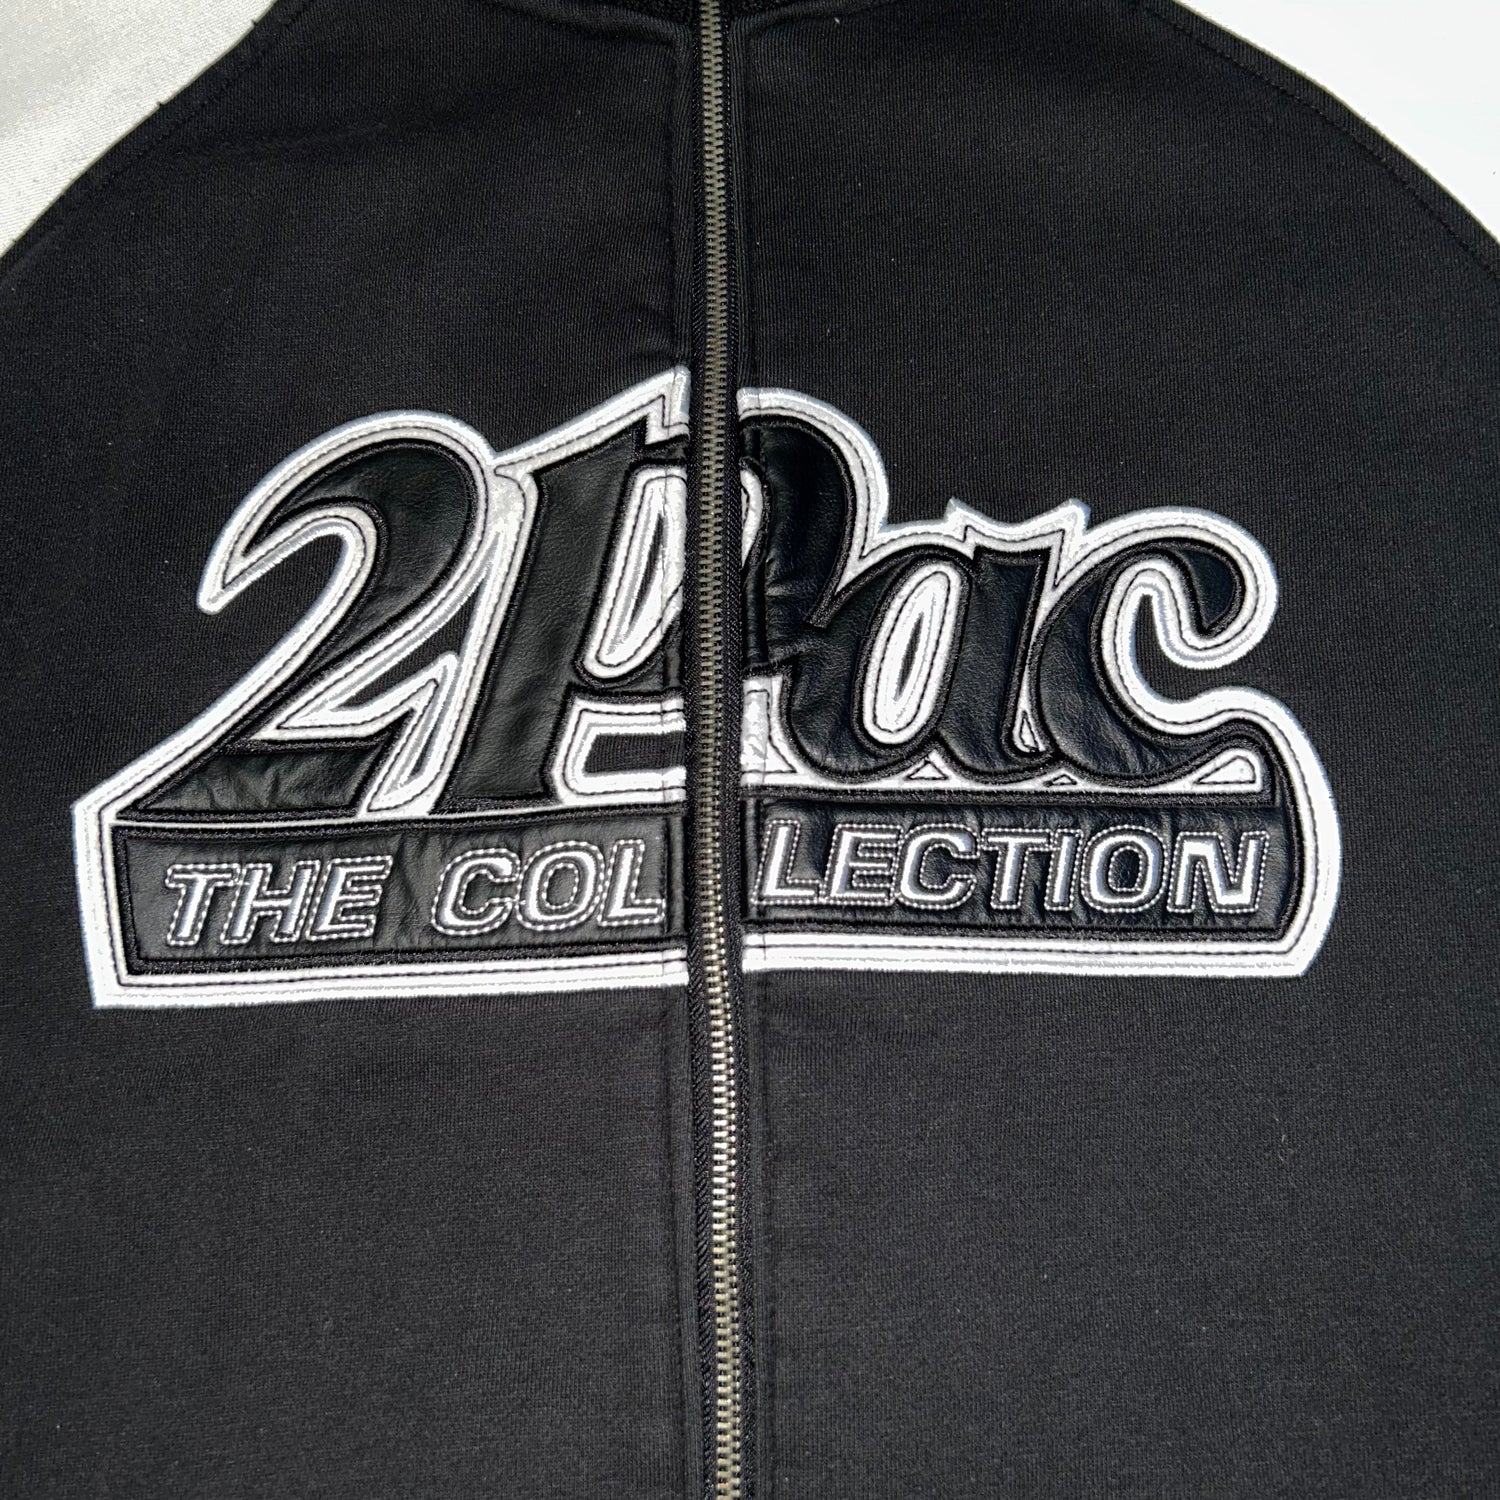 The Collection Vintage 2PAC Jacket (XL)